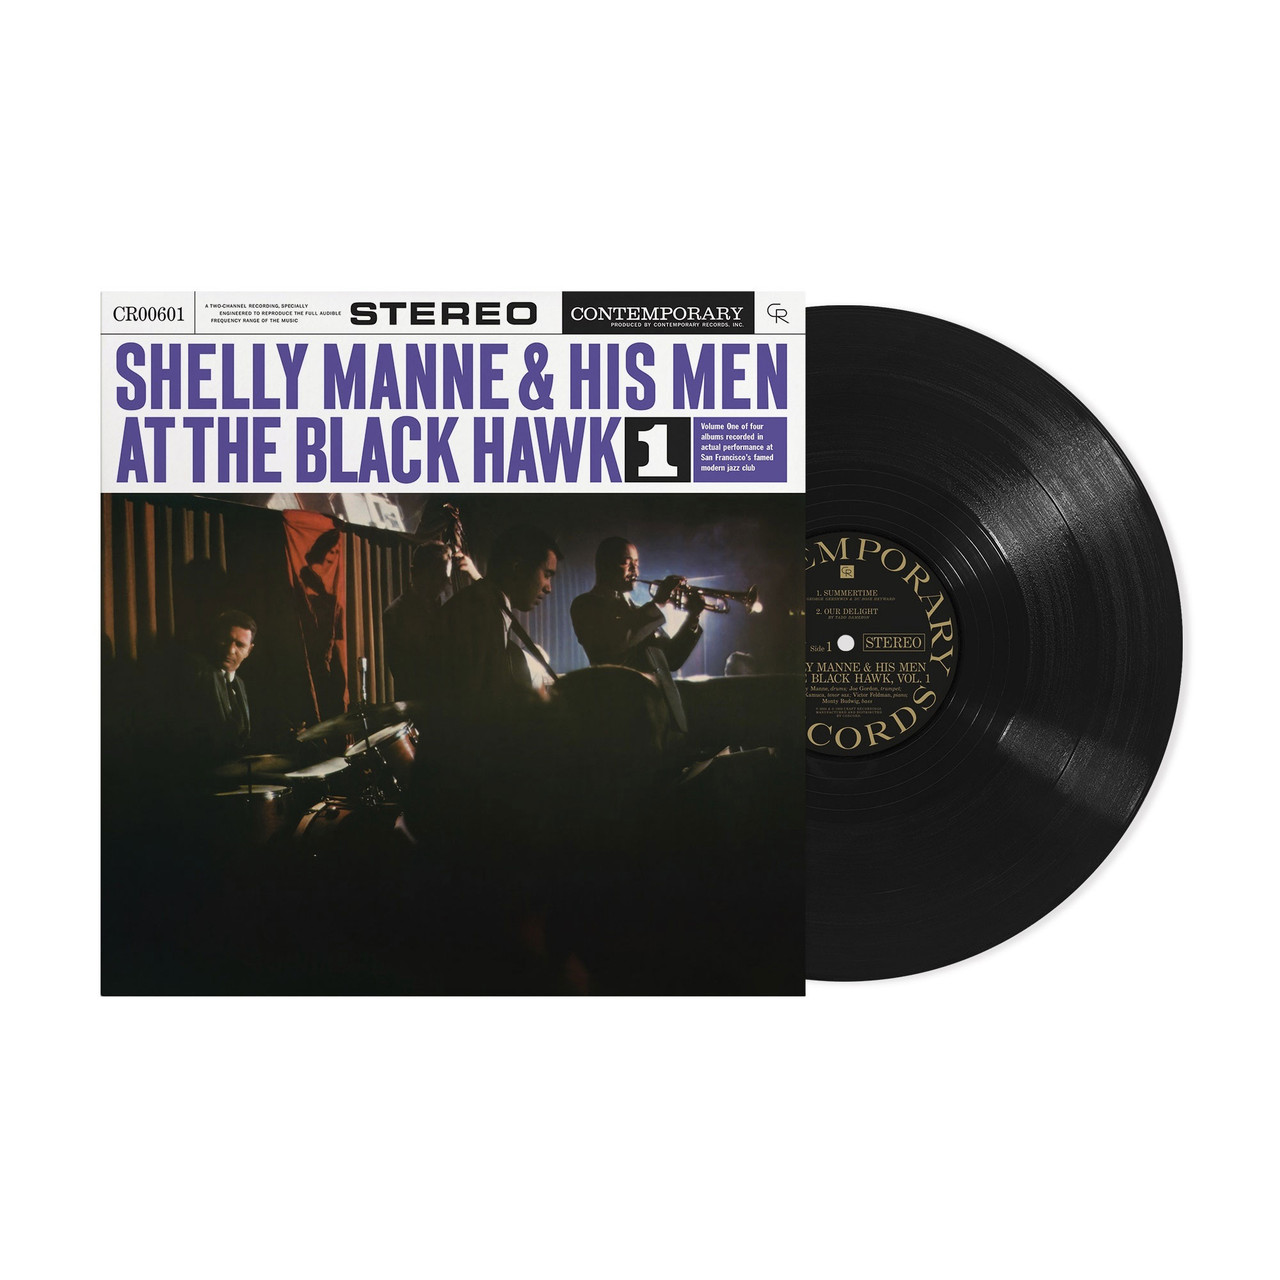 Shelly Manne & His Men At the Black Hawk, Vol. 1 (Contemporary 